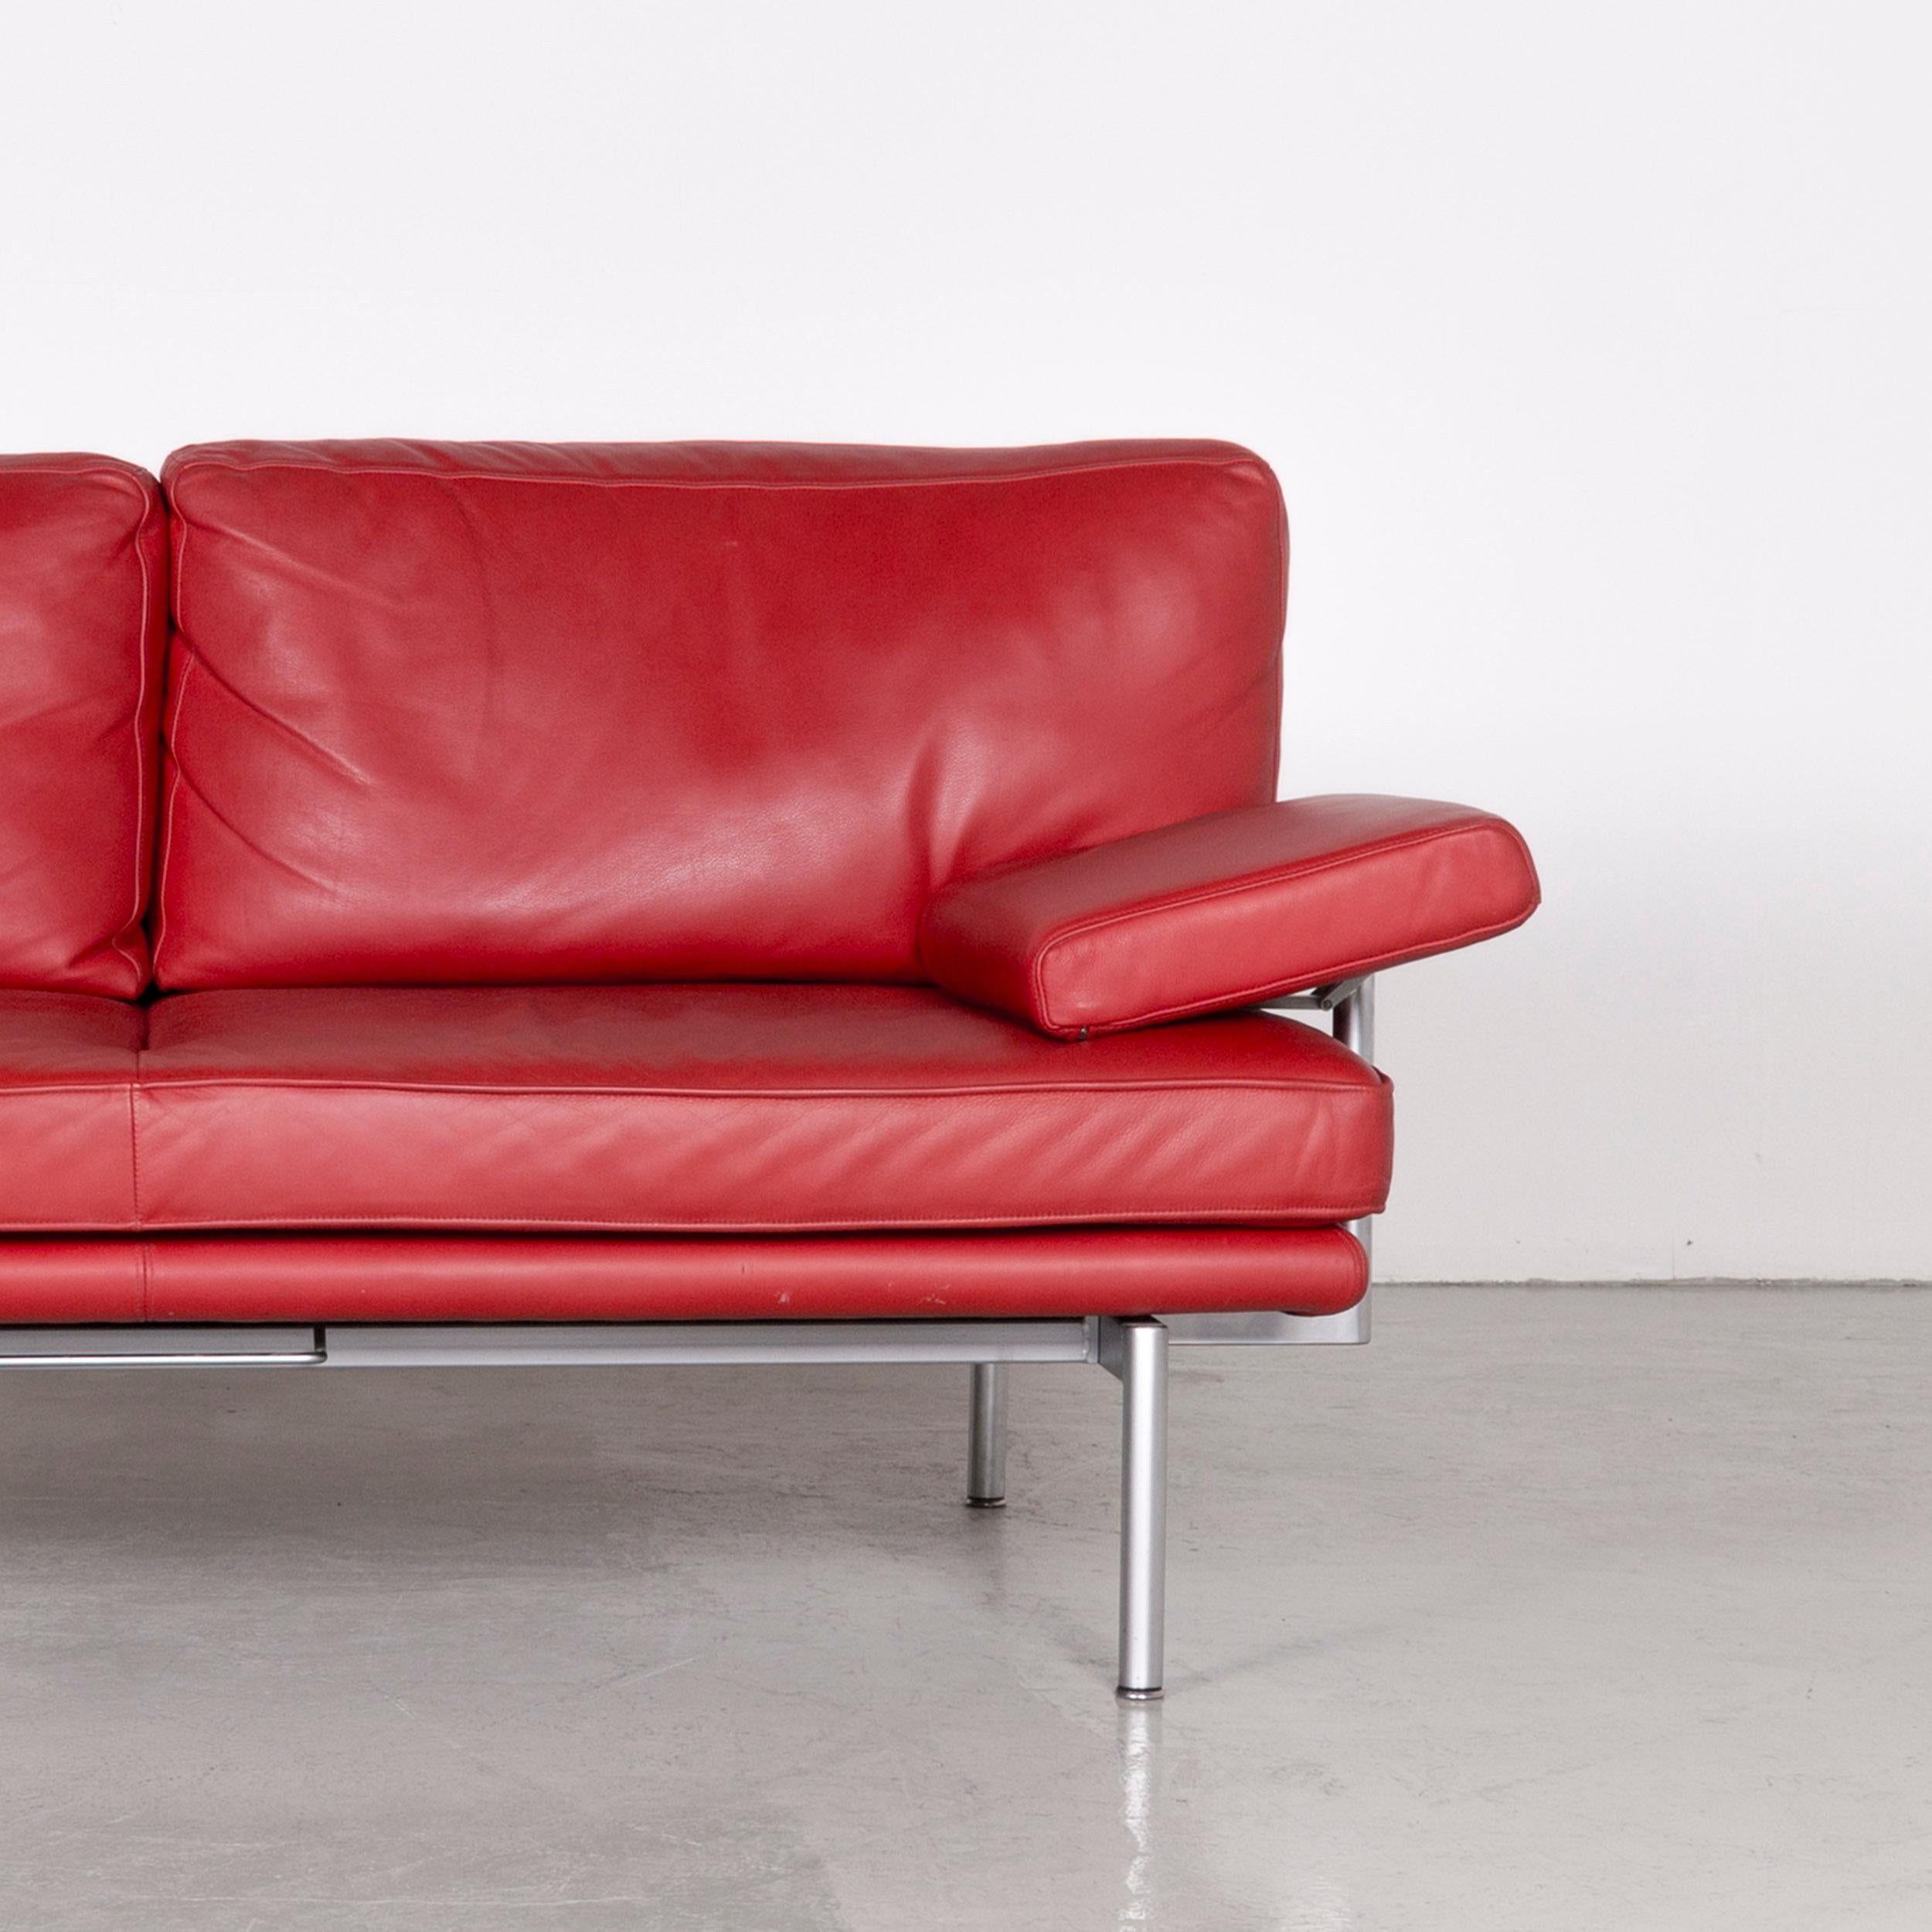 Walter Knoll Living Platform Designer Leather Couch Red by EOOS Design In Good Condition For Sale In Cologne, DE